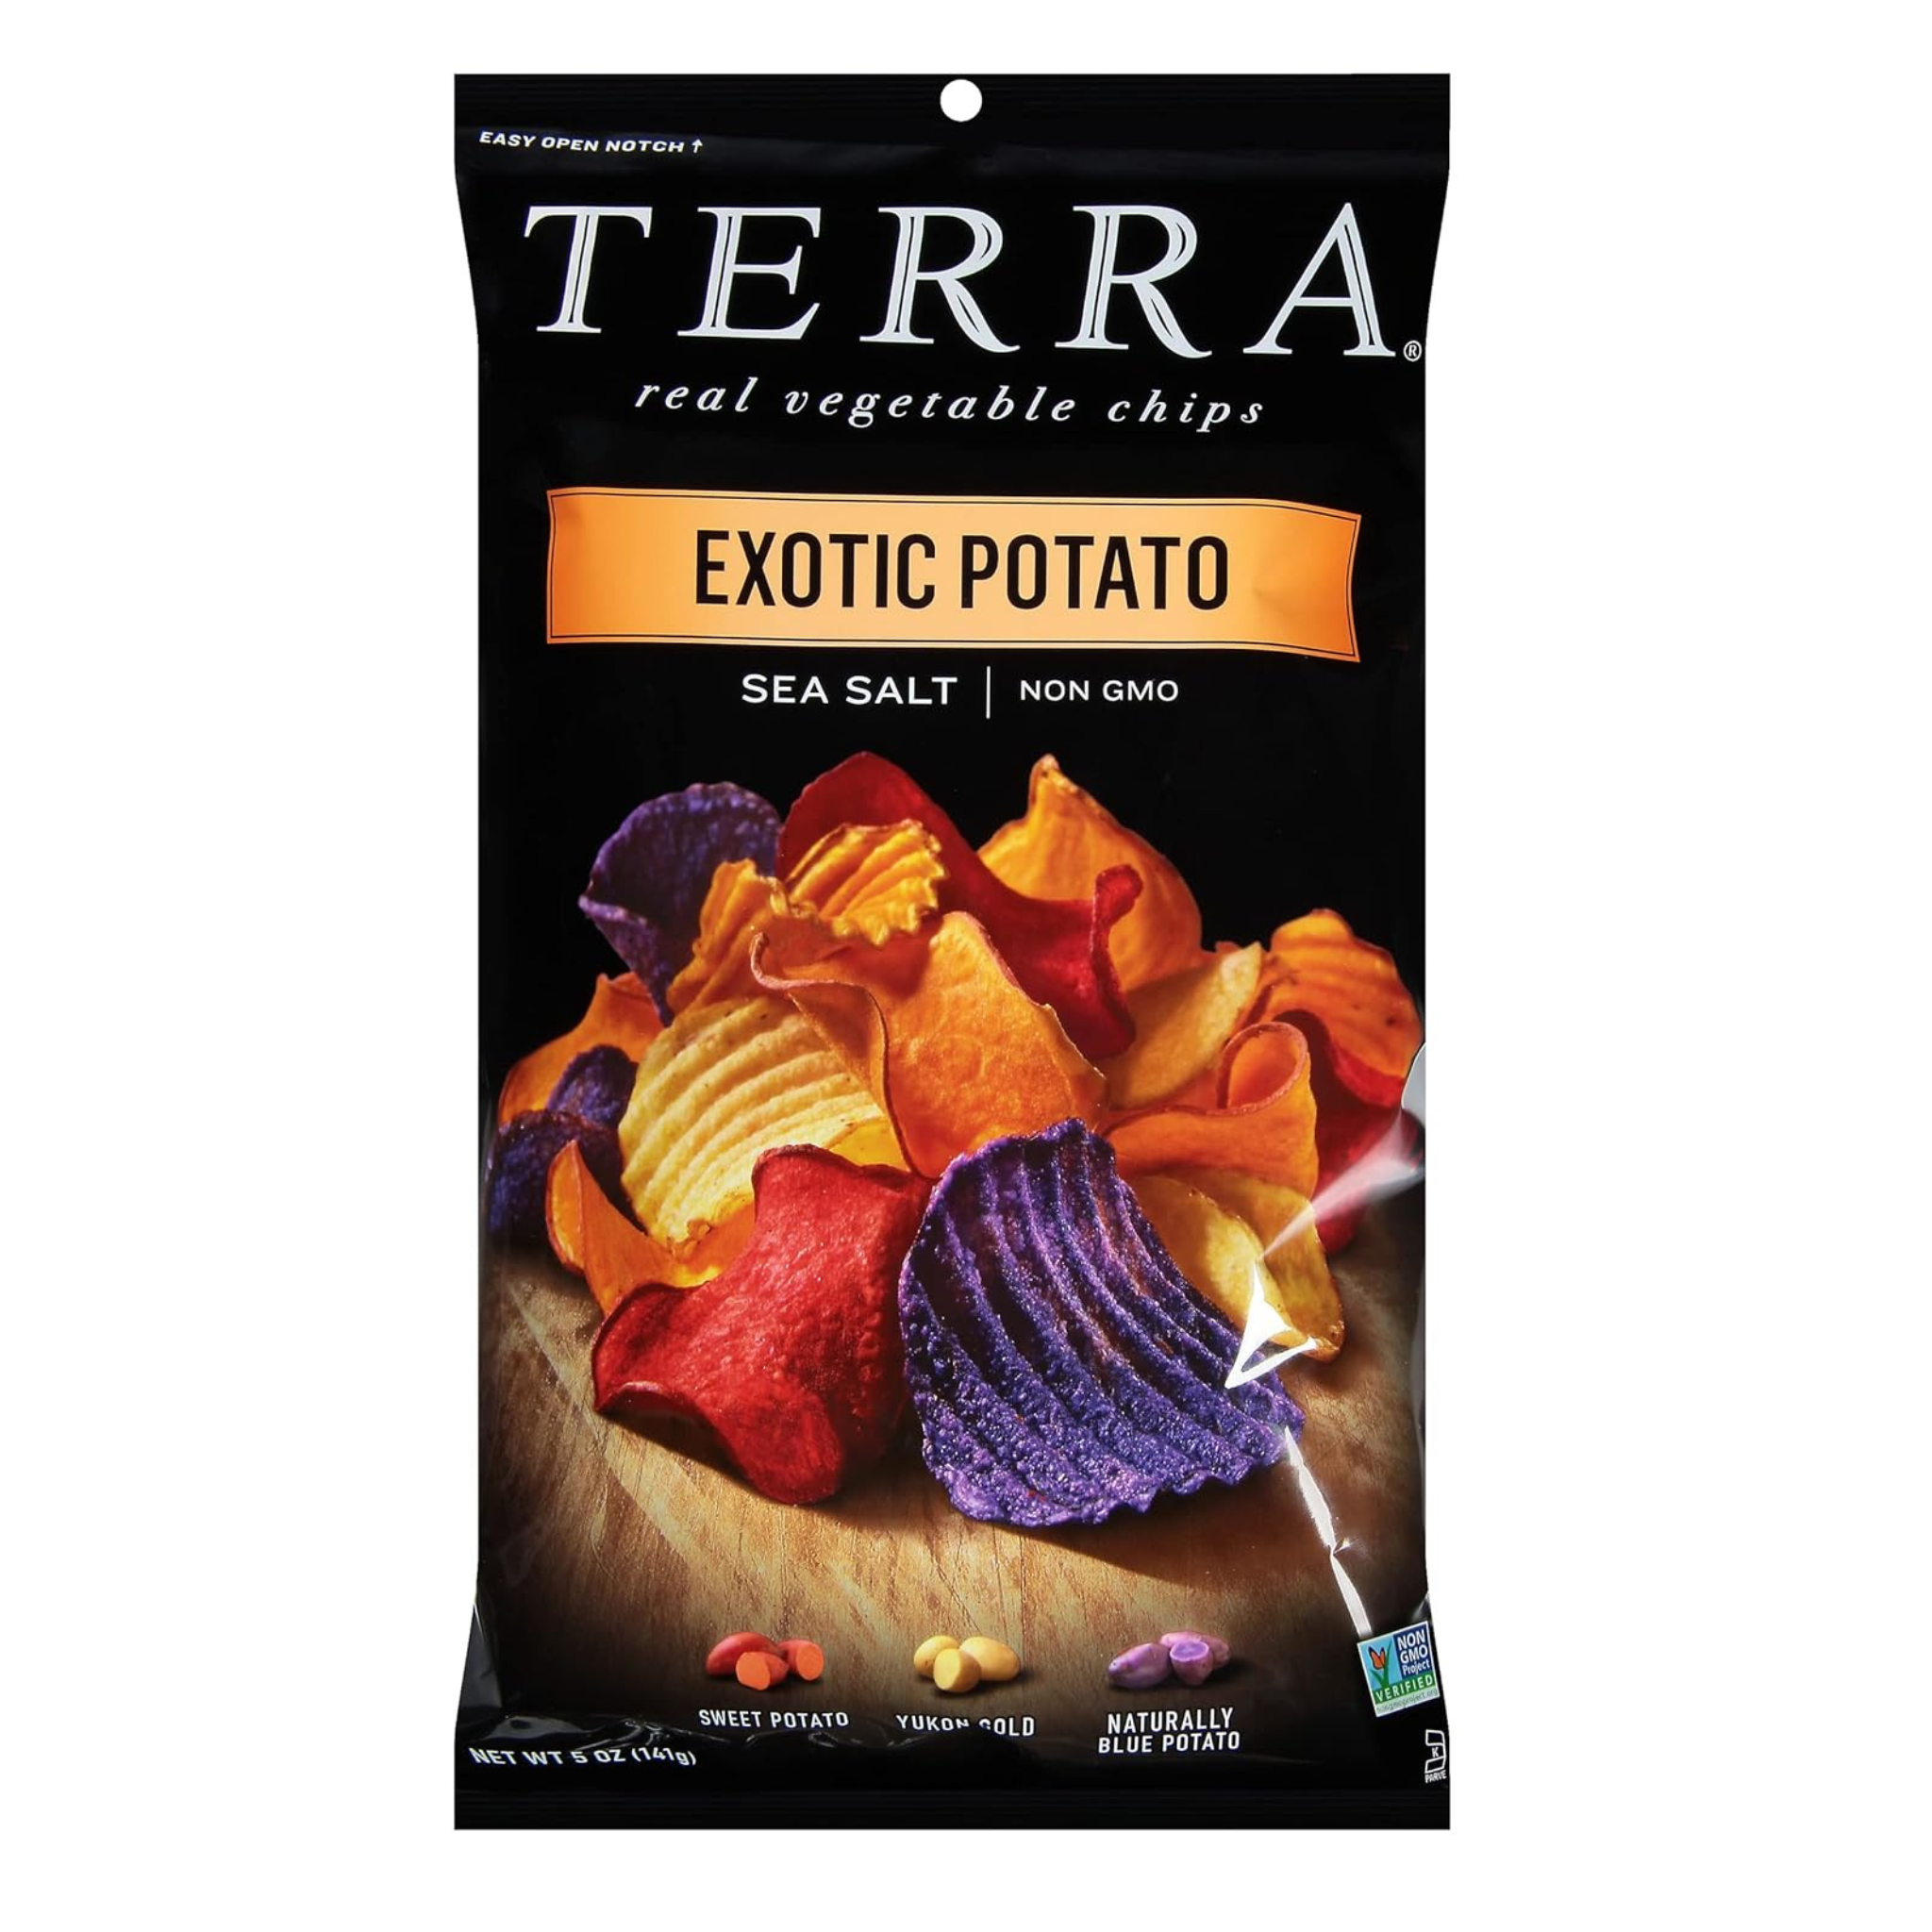 12 Bags of Terra Vegetable Chips, Exotic Potato with Sea Salt (5 oz. Bags)